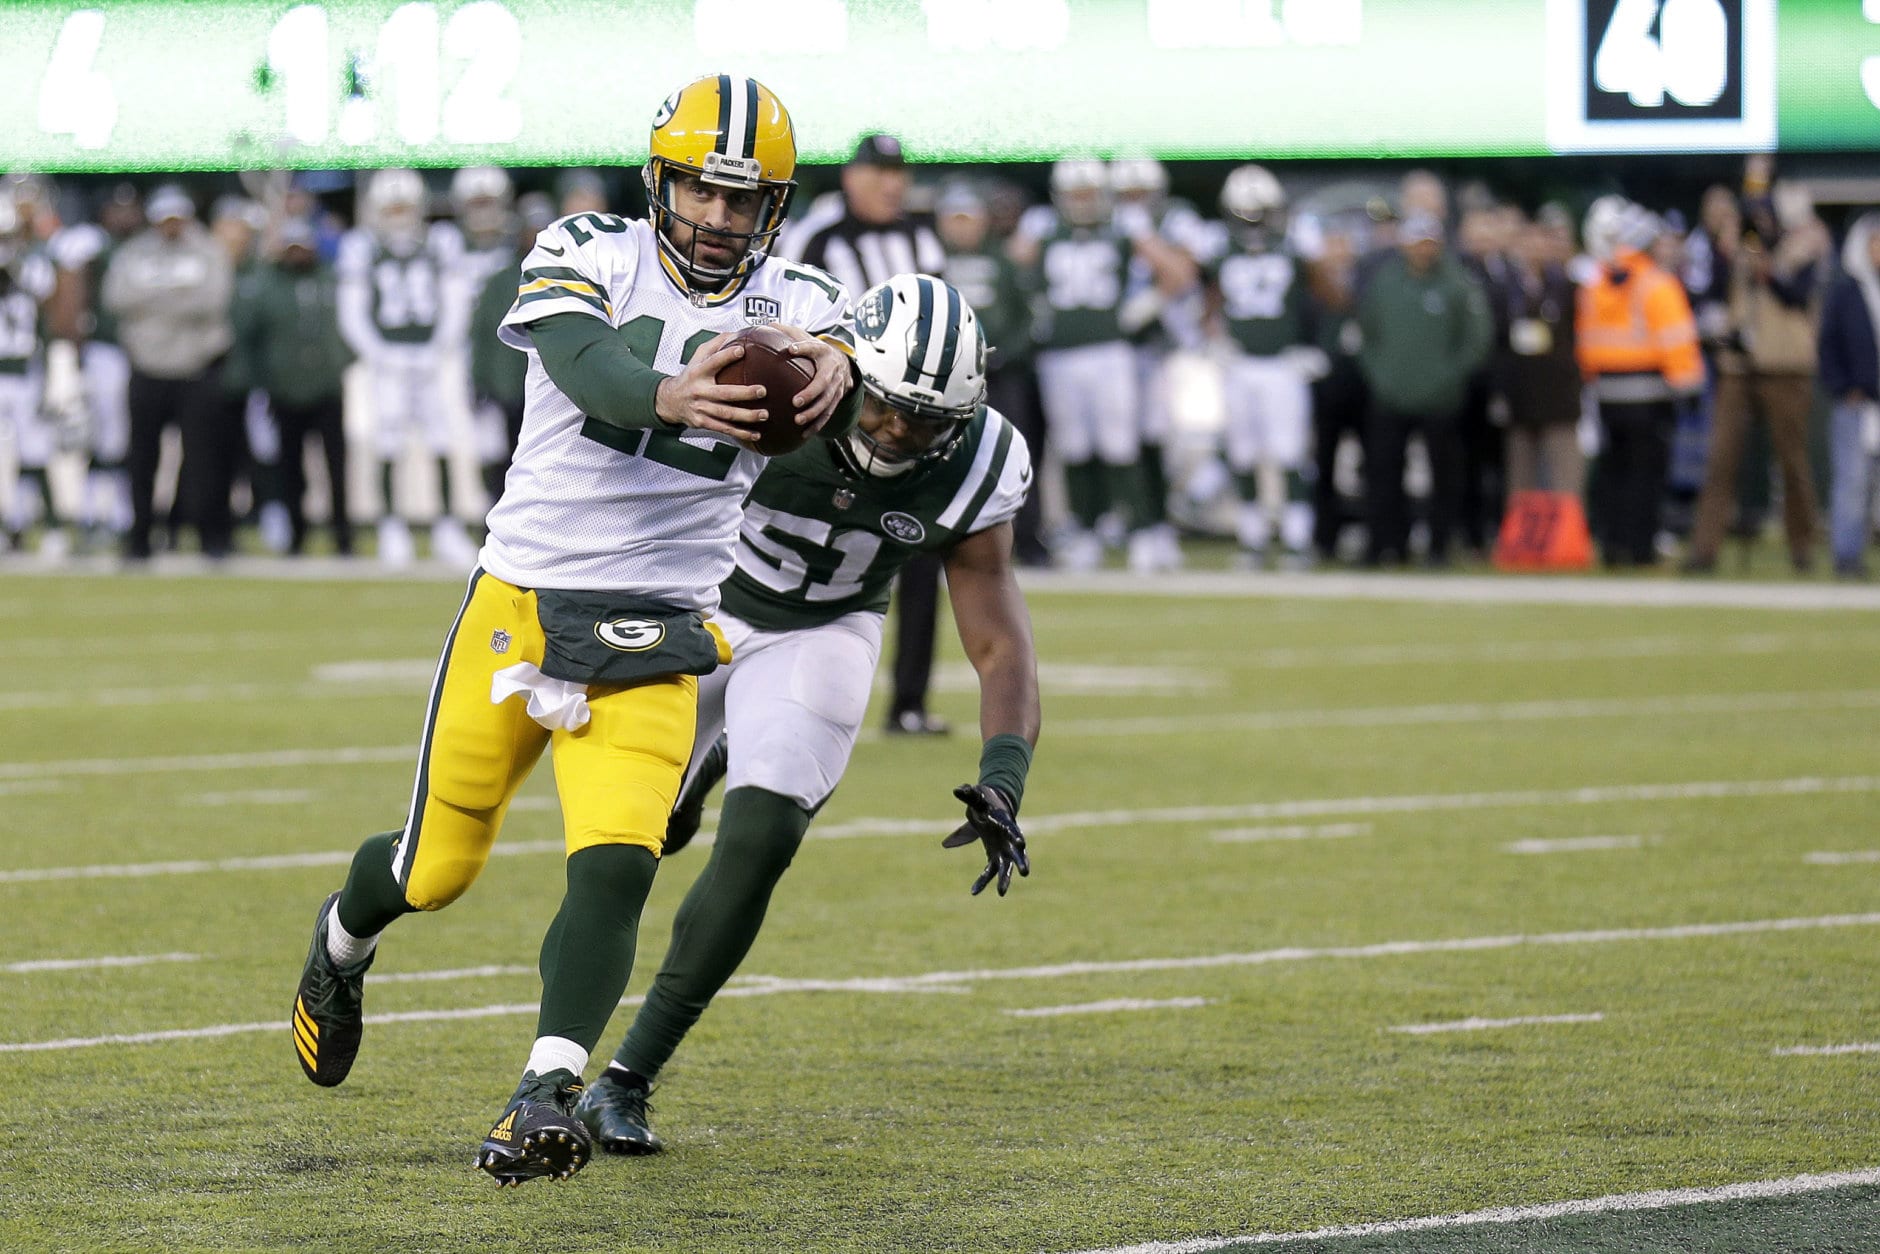 Green Bay Packers quarterback Aaron Rodgers, front, scores a two-point conversion as New York Jets outside linebacker Brandon Copeland chases him during the second half of an NFL football game, Sunday, Dec. 23, 2018, in East Rutherford, N.J. (AP Photo/Seth Wenig)